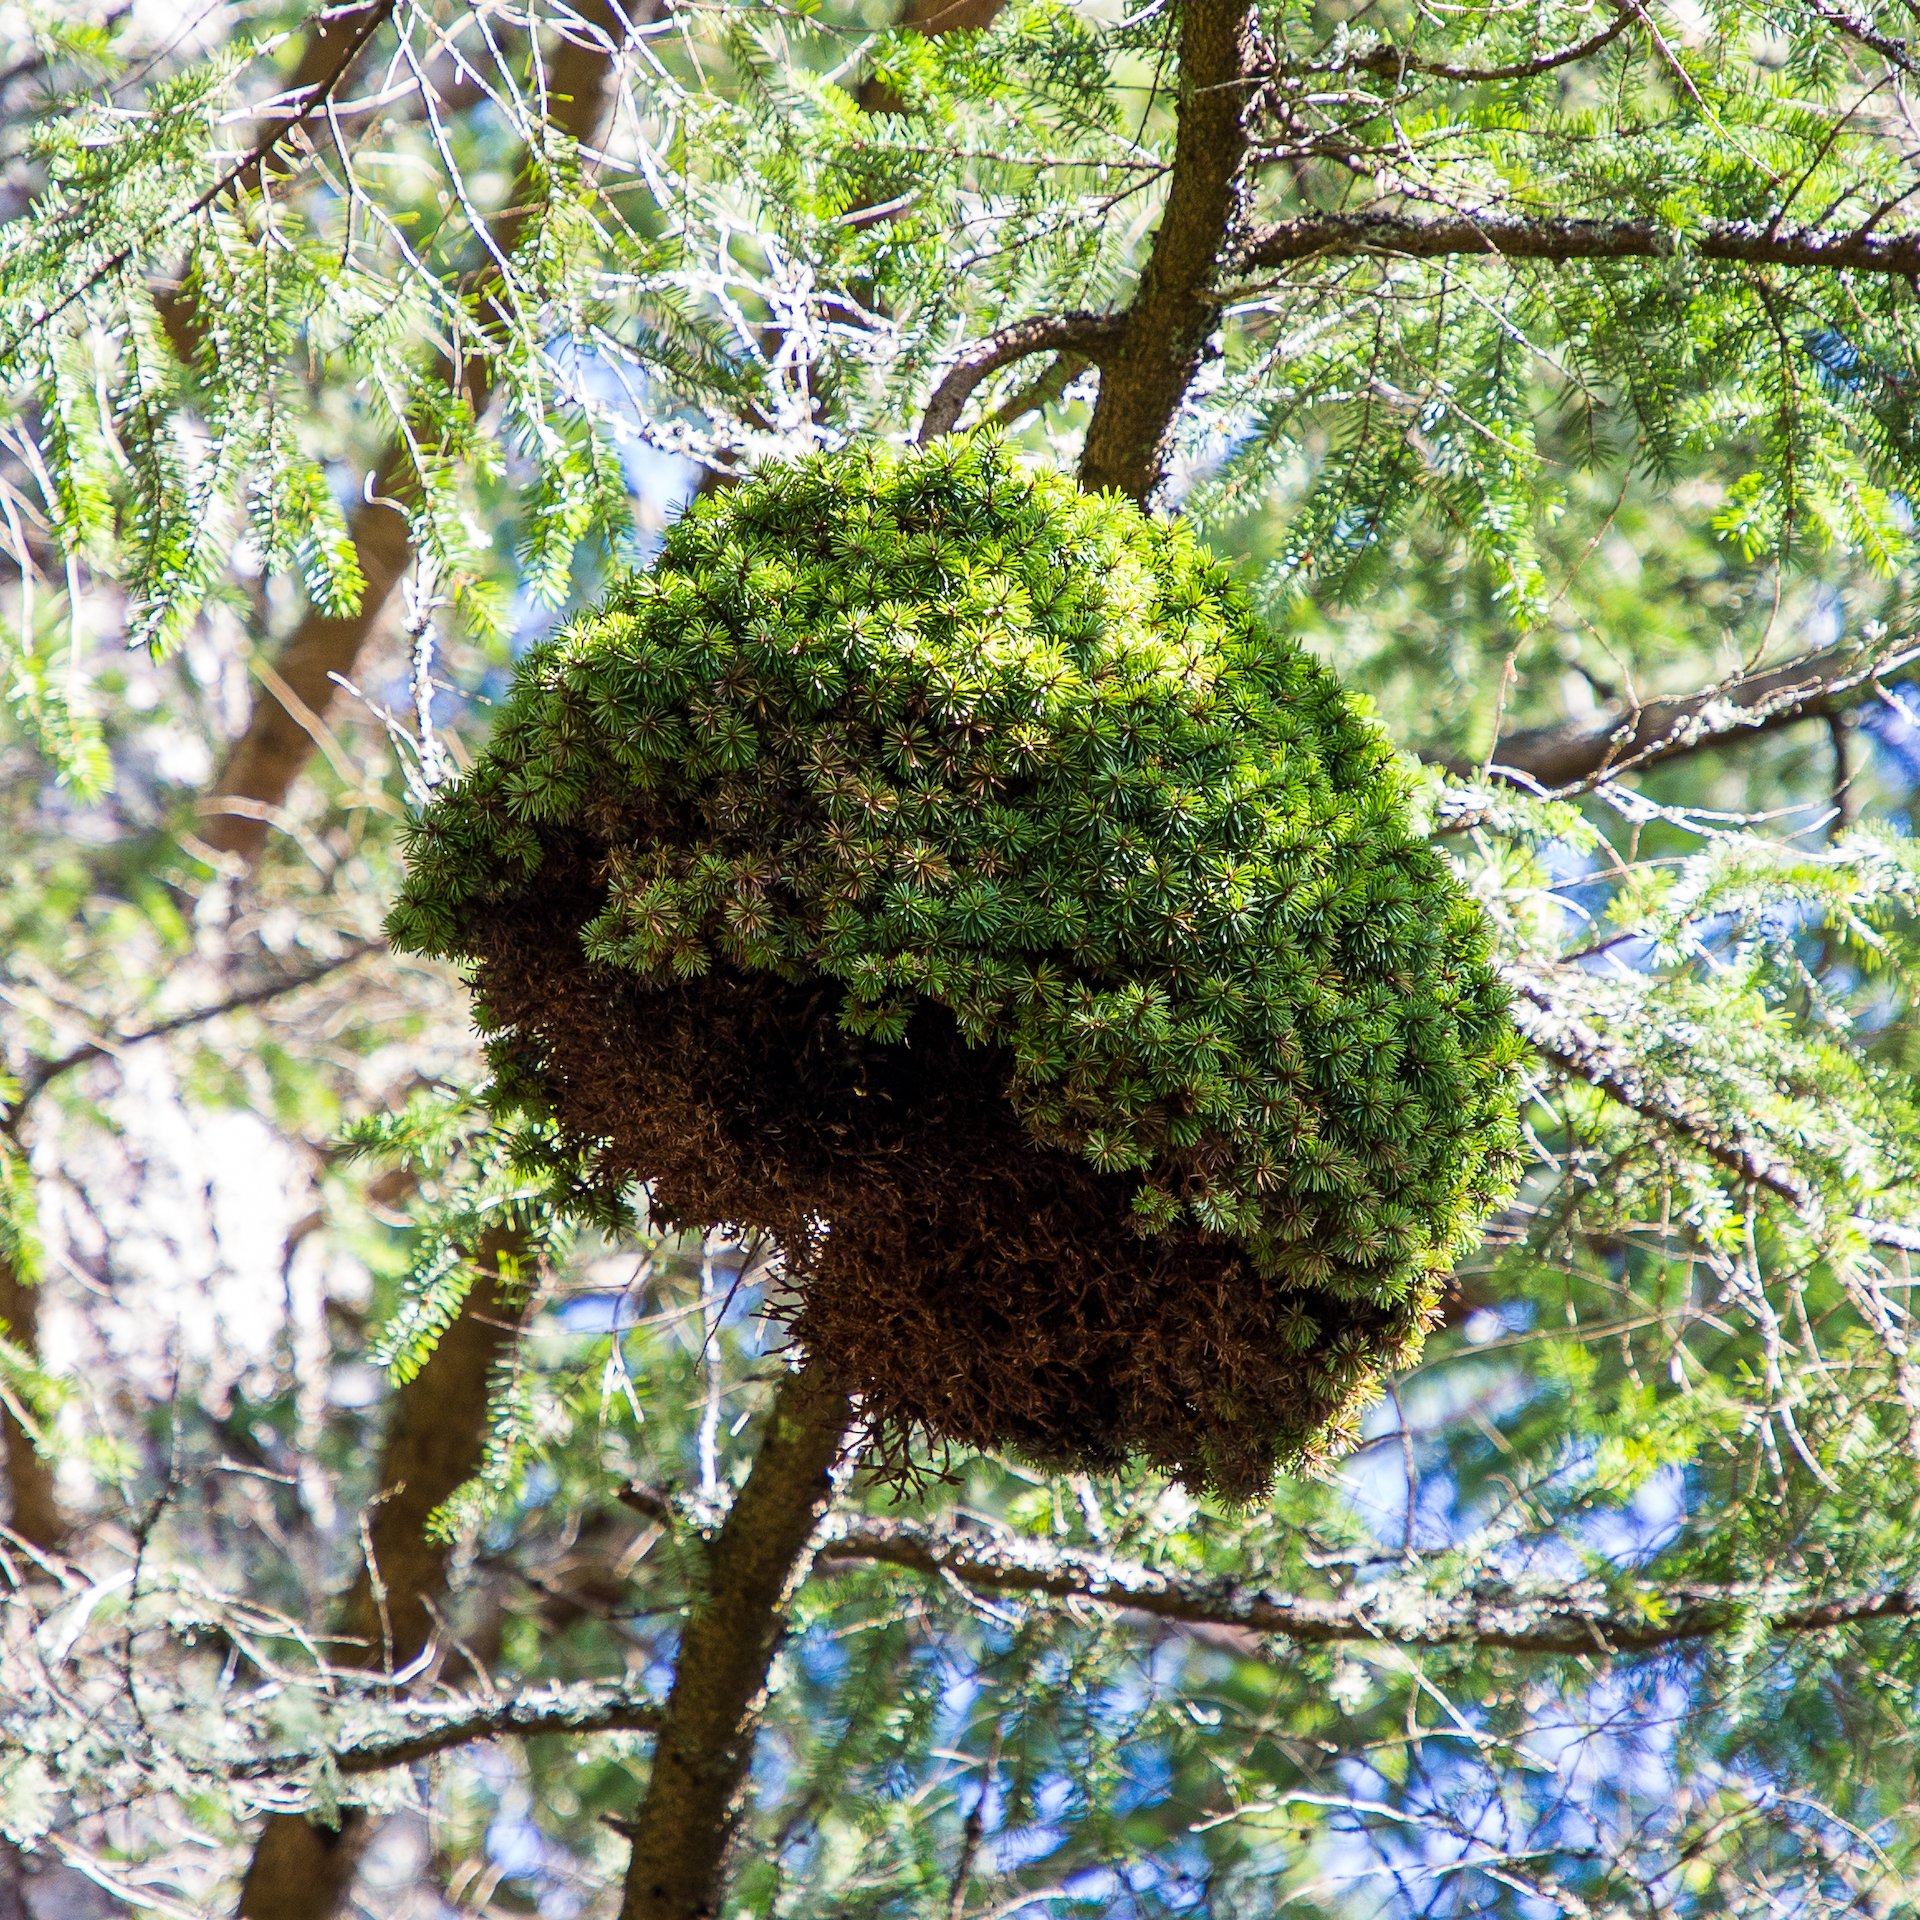  There was one of these cool “growths” up in one of the fir trees near the start of the hike. We’ve seen these on the island before, and I think they’re some kind of symbiotic growth. 